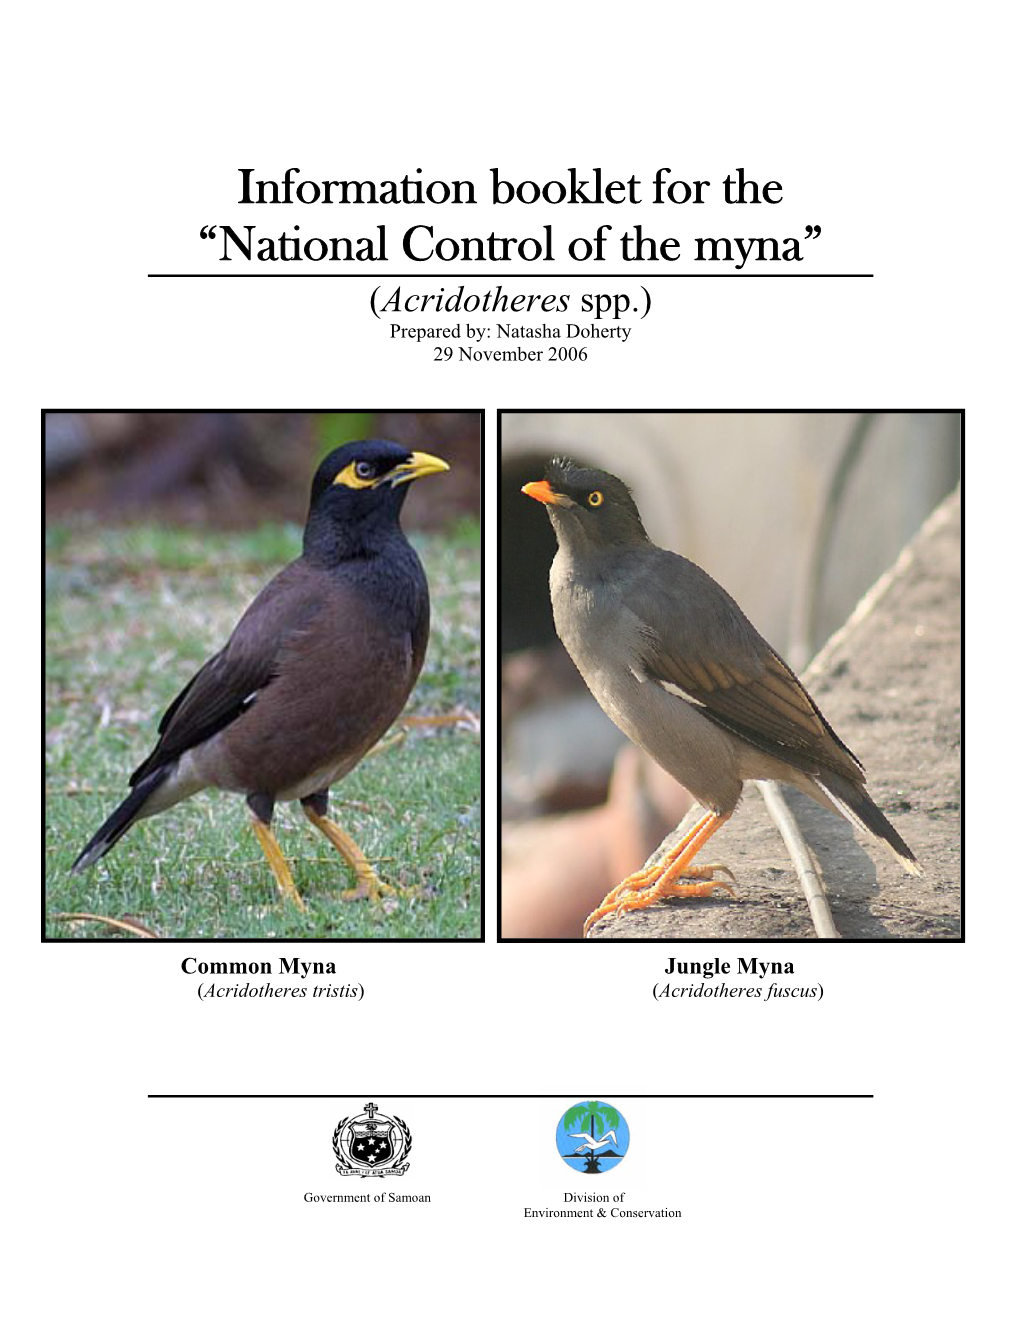 Information Booklet for the “National Control of the Myna” (Acridotheres Spp.) Prepared By: Natasha Doherty 29 November 2006